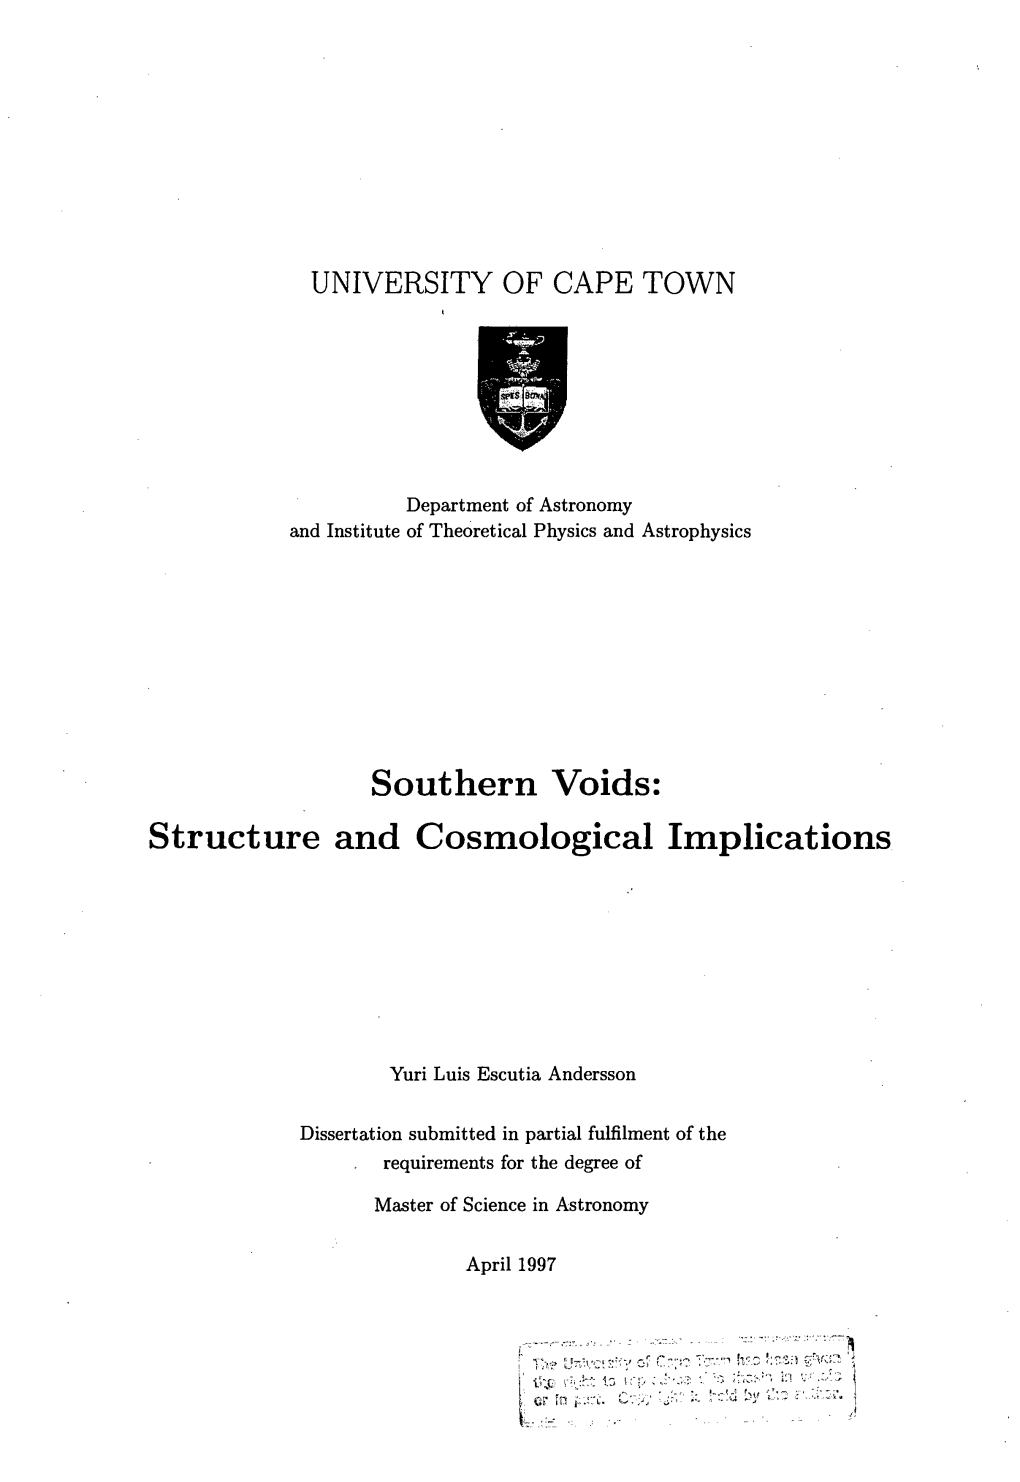 Southern Voids: Structure and Cosmological Implications